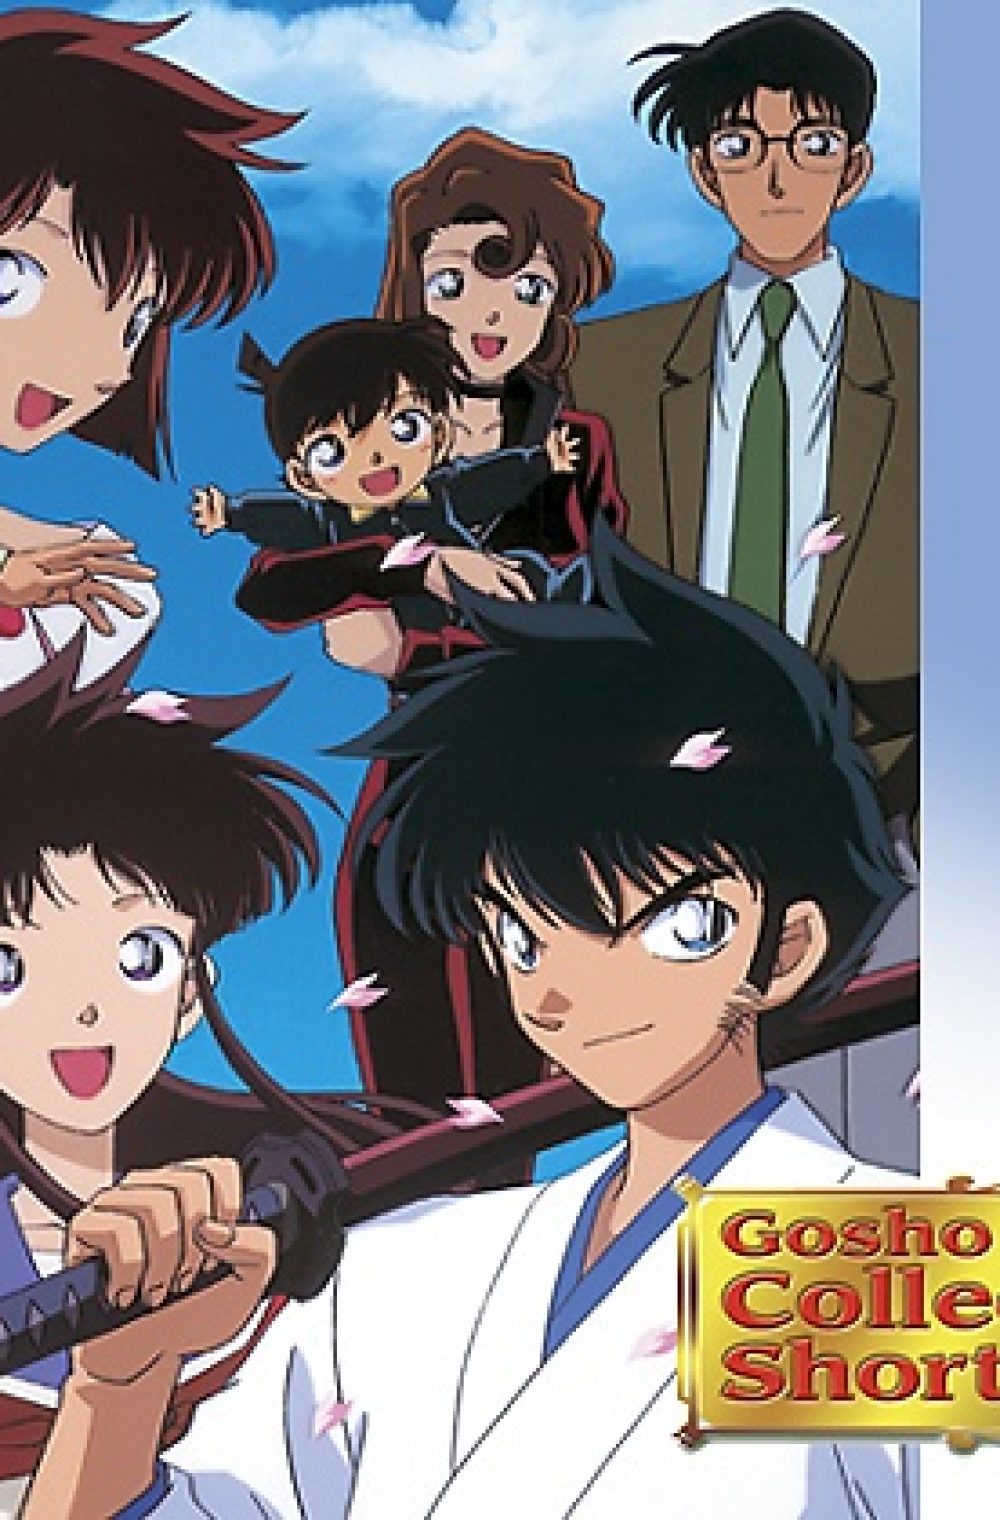 Detective Conan: Gosho Aoyama’s Collection of Short Stories